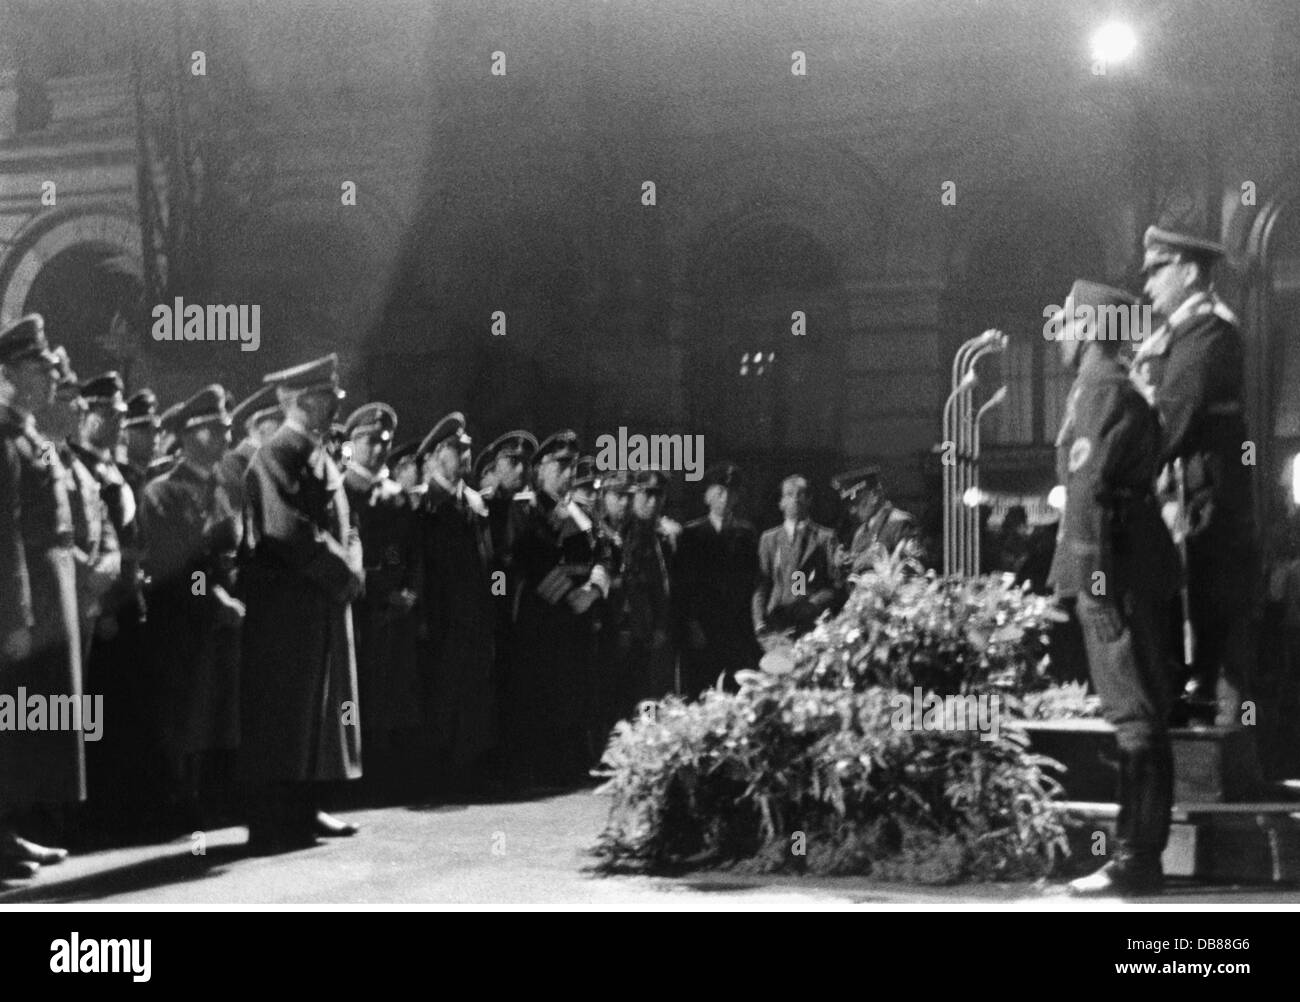 Nazism / National Socialism,politics,Axis Rome-Berlin,journey of Chancellor of the Reich Adolf Hitler to Italy,3. - 10.5.1938,return,reception in Berlin,10.5.1938,address of Hermann Goering Lehrter Railway Station,speech,speeches,crowd,crowds,crowds of people,axis Rome - Berlin,people,state visit,state visits,Germany,German Reich,Third Reich,1930s,30s,20th century,politics,policy,address,addresses,railway station,railroad station,train station,railway stations,railroad stations,train stations,historic,historical,Goering,Göri,Additional-Rights-Clearences-Not Available Stock Photo